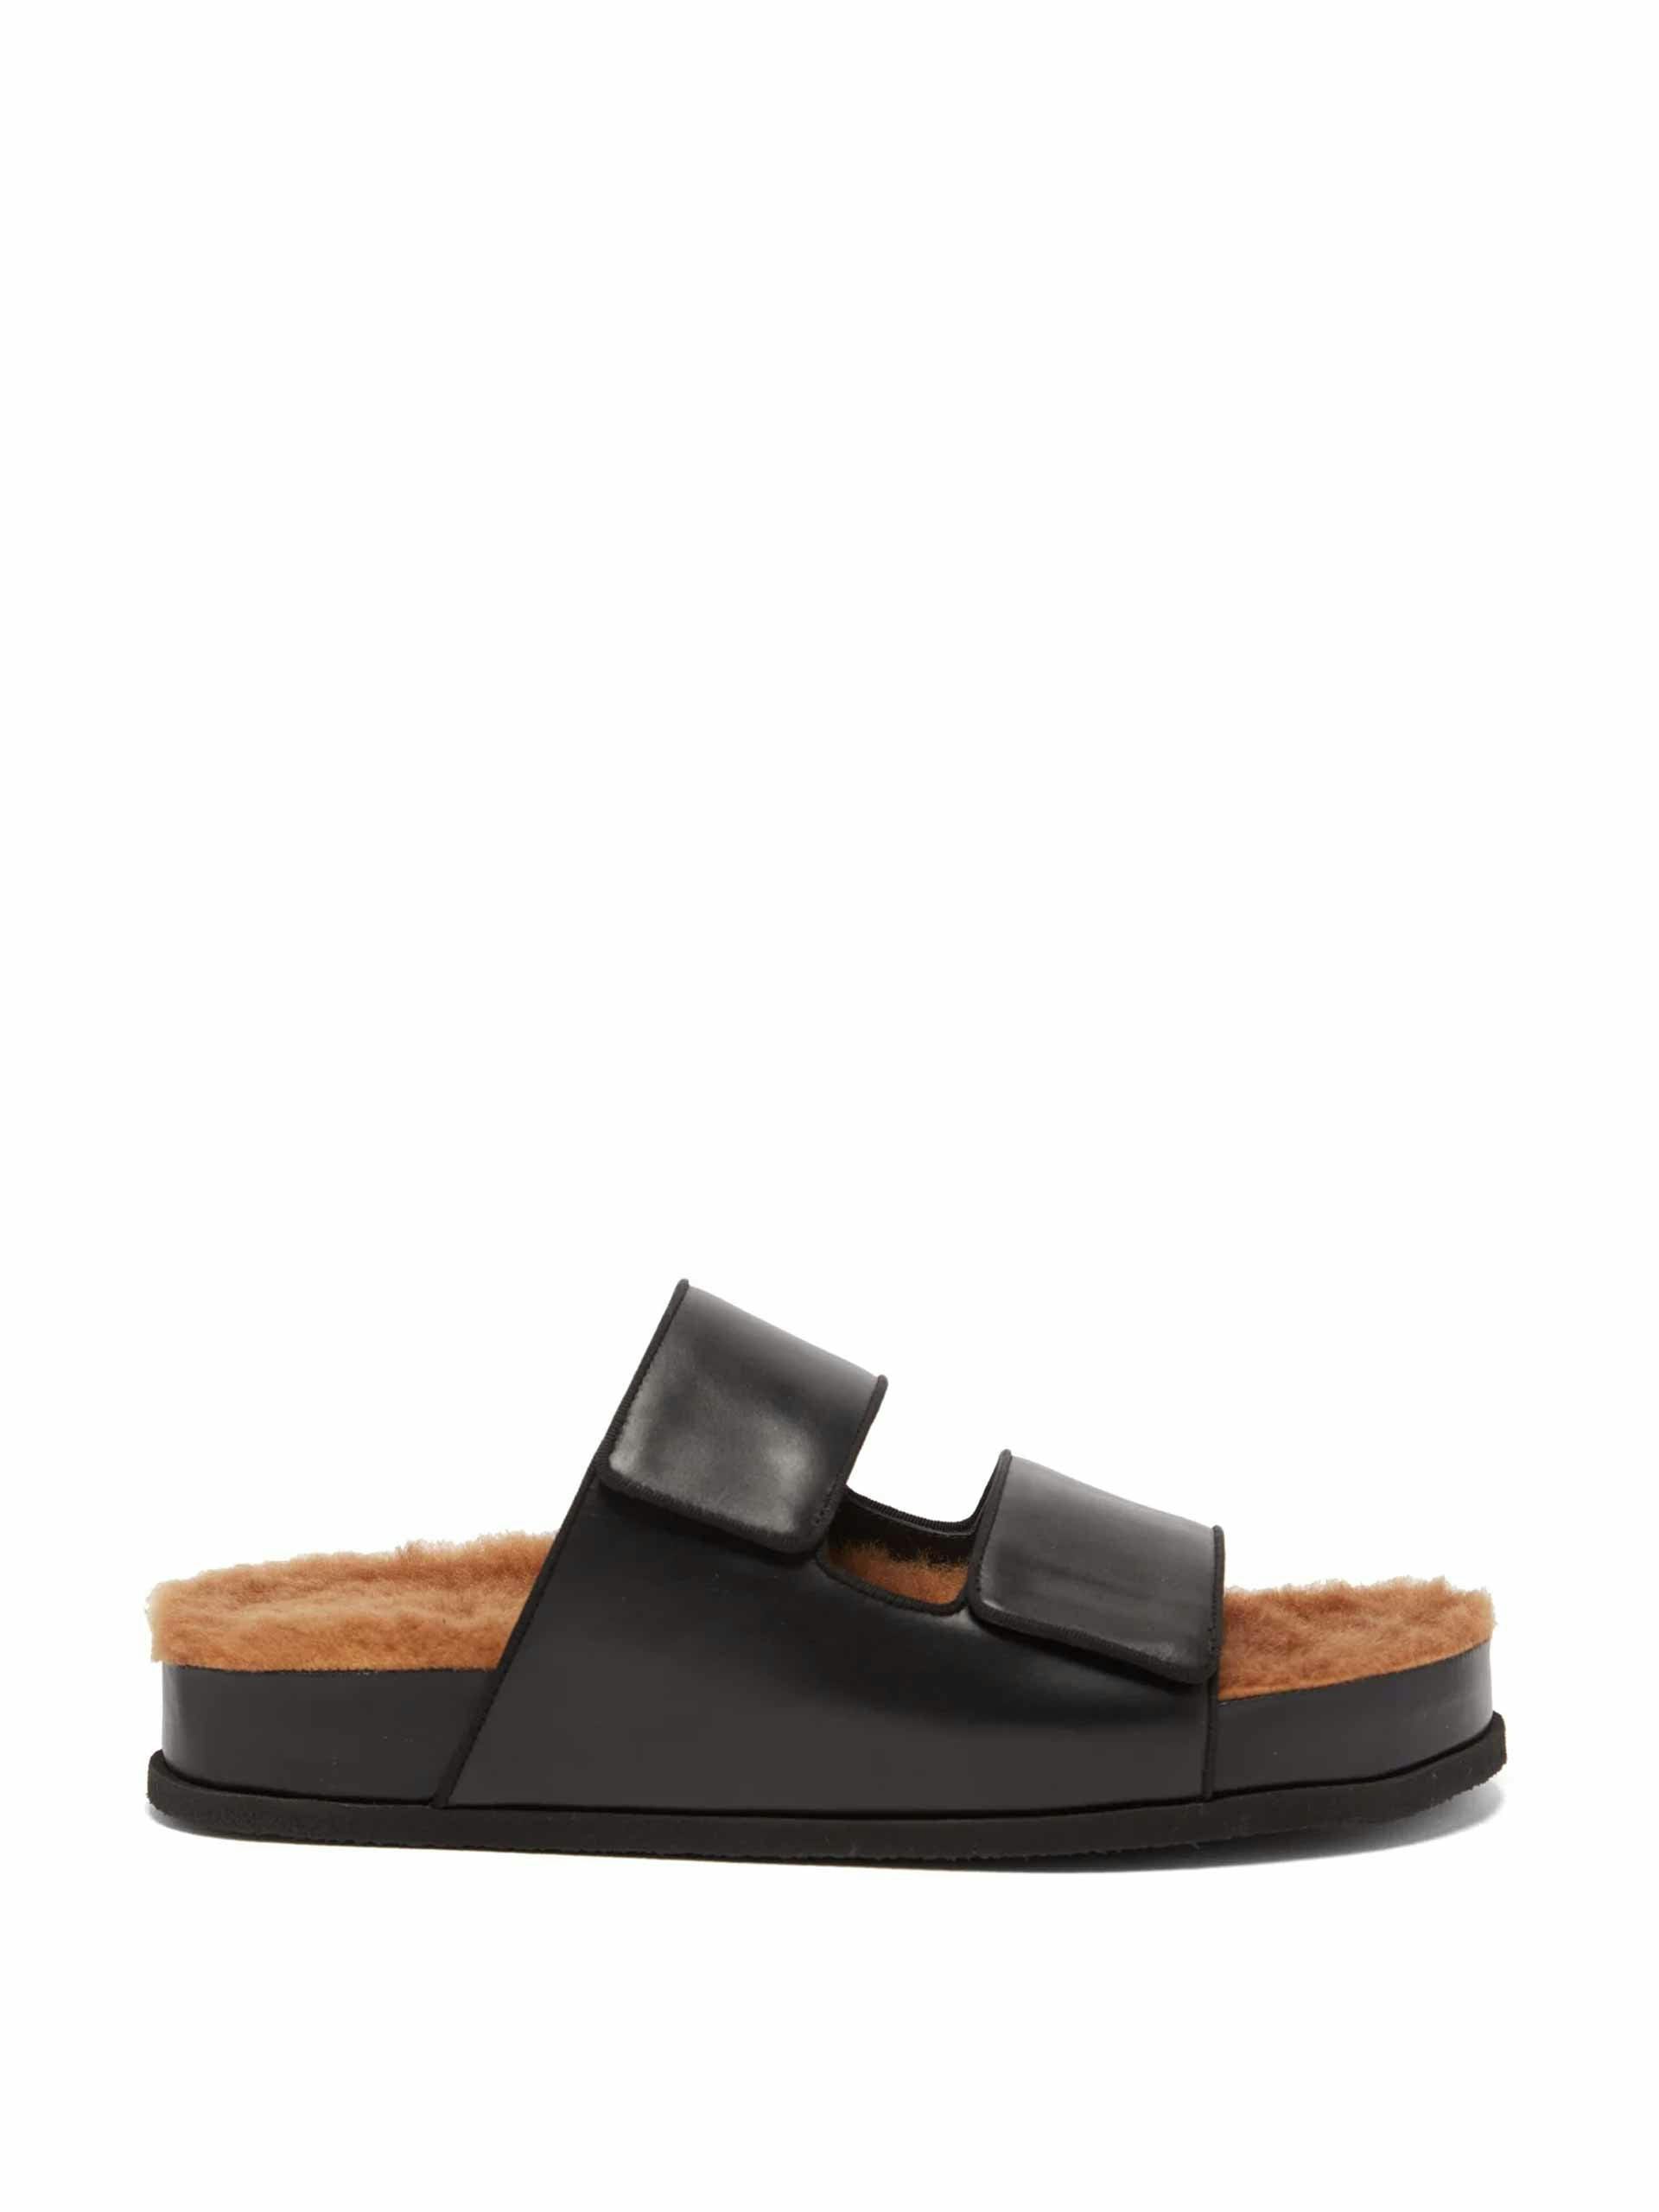 Shearling-lined leather slides